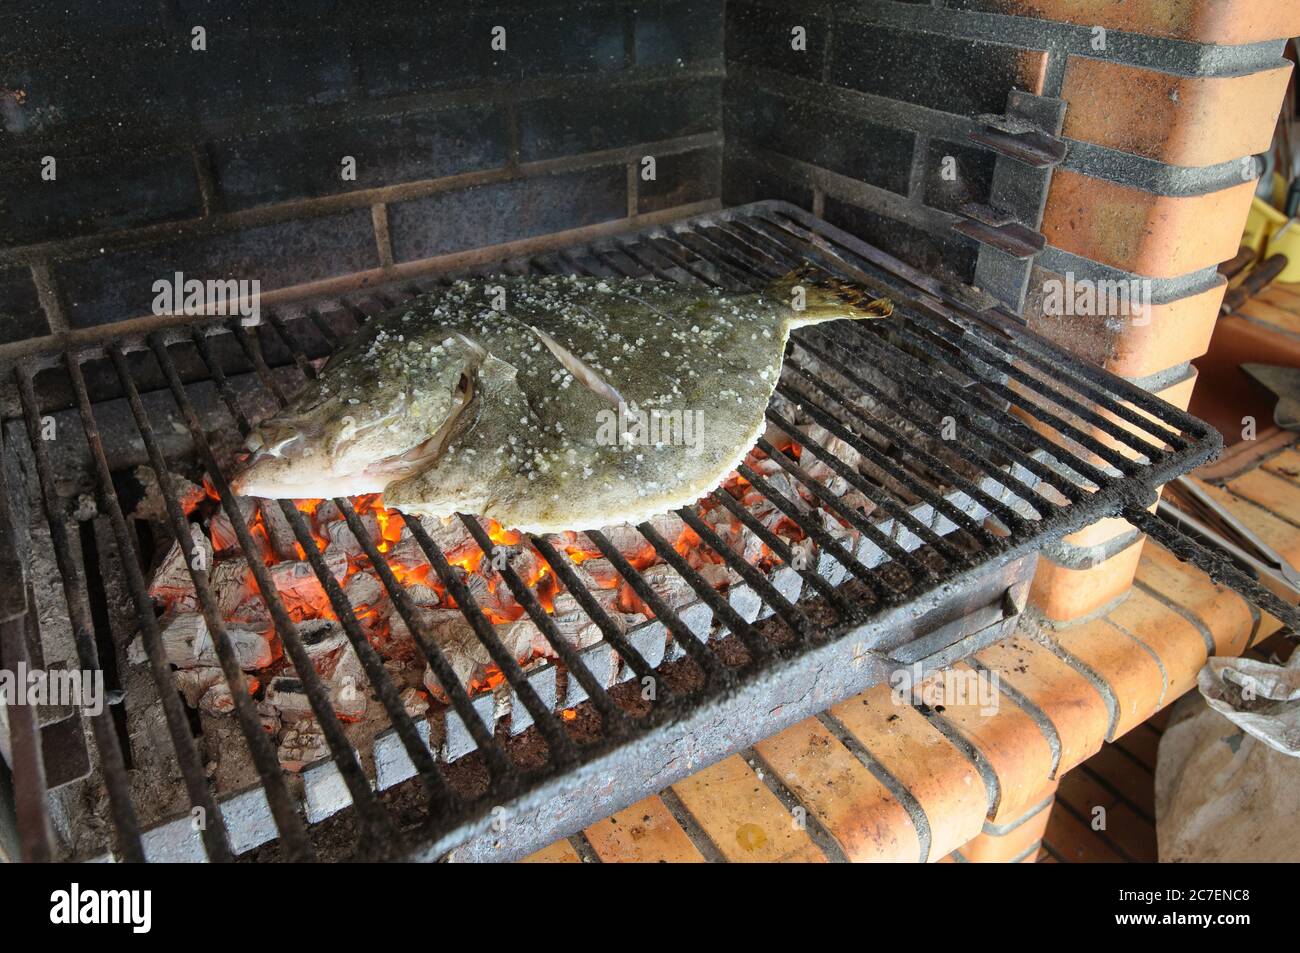 turbot on the grill or barcebue Stock Photo